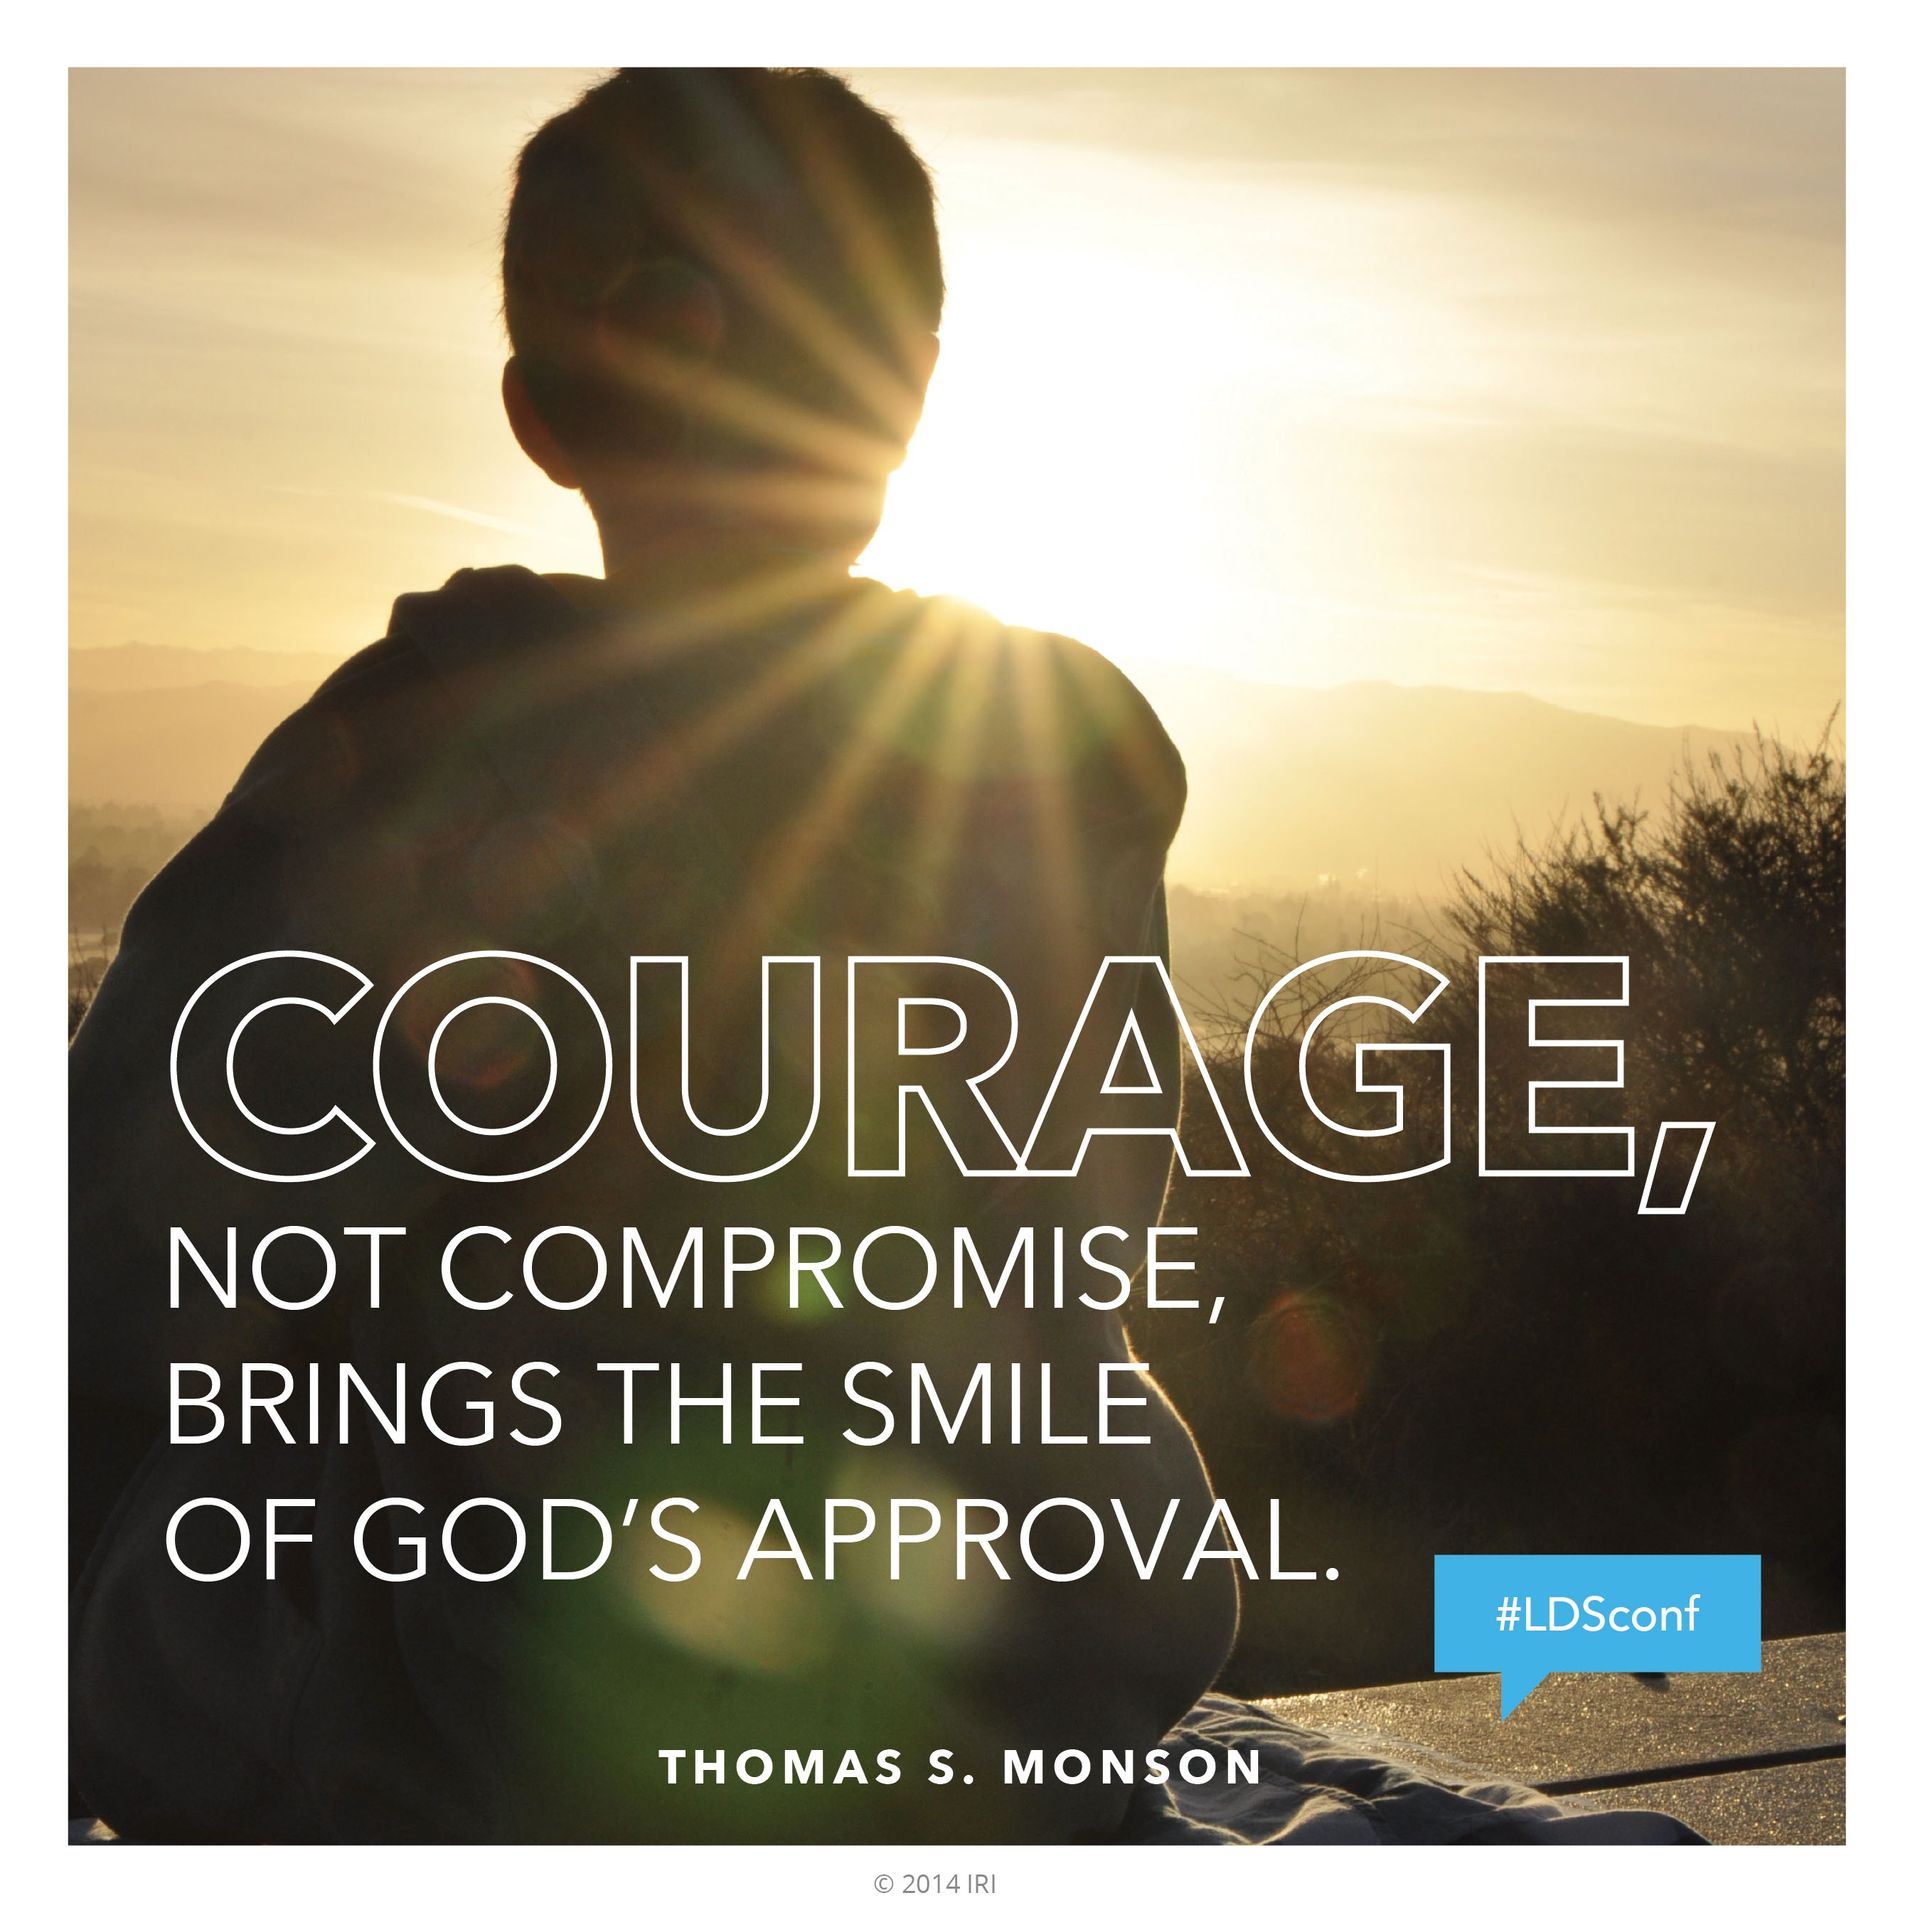 “Courage, not compromise, brings the smile of God’s approval.”—President Thomas S. Monson, “The Call for Courage” © undefined ipCode 1.